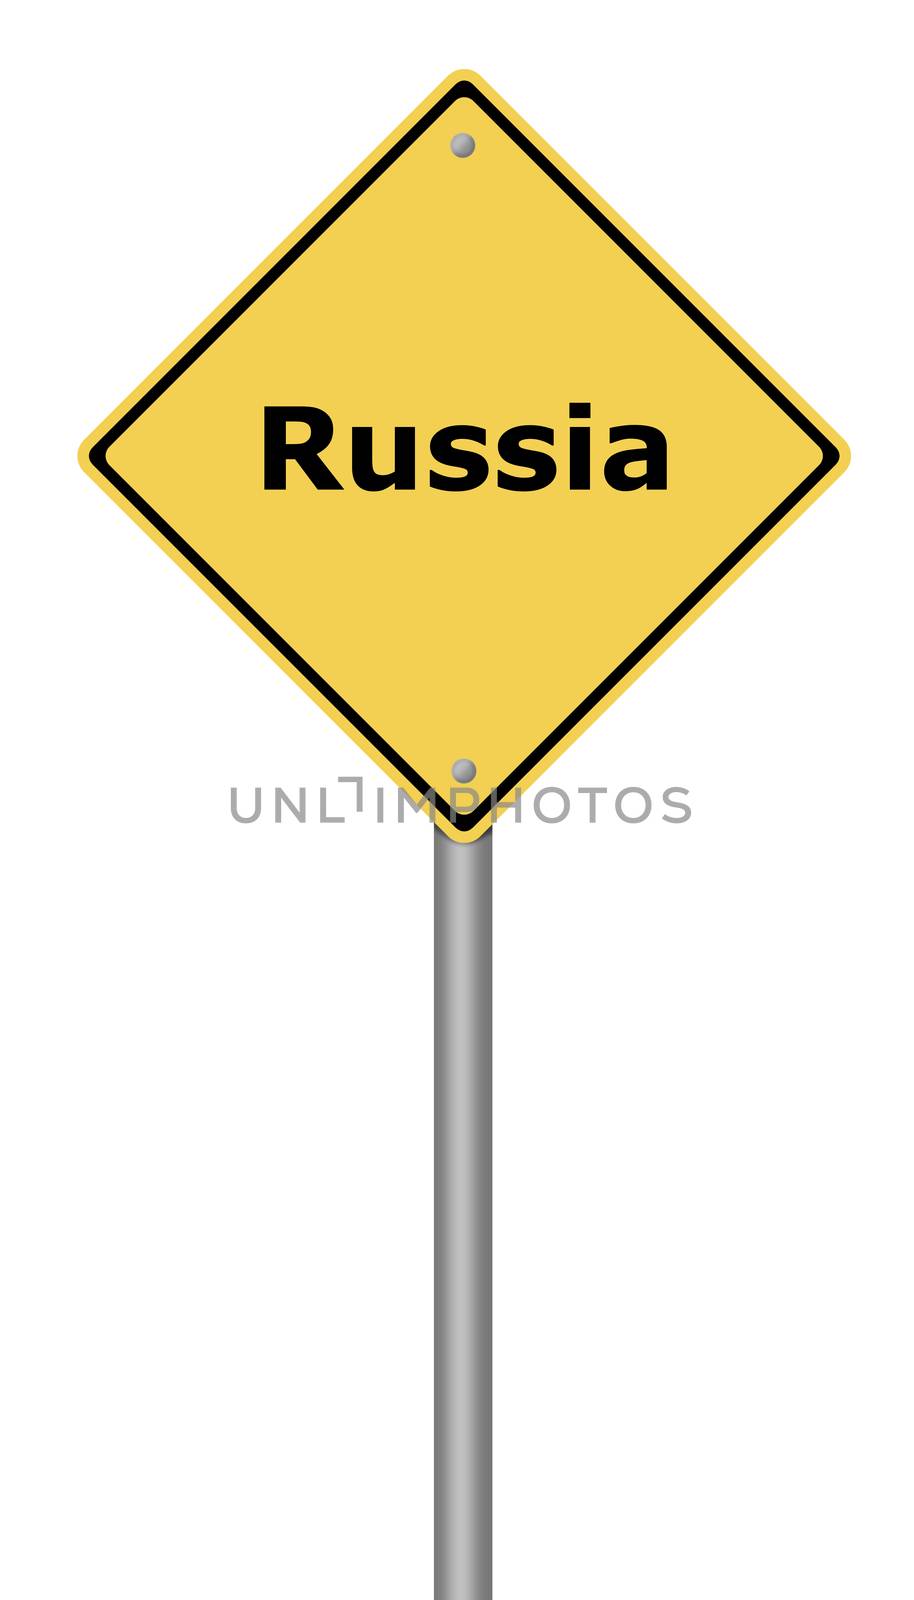 Yellow warning sign with the text Russia.